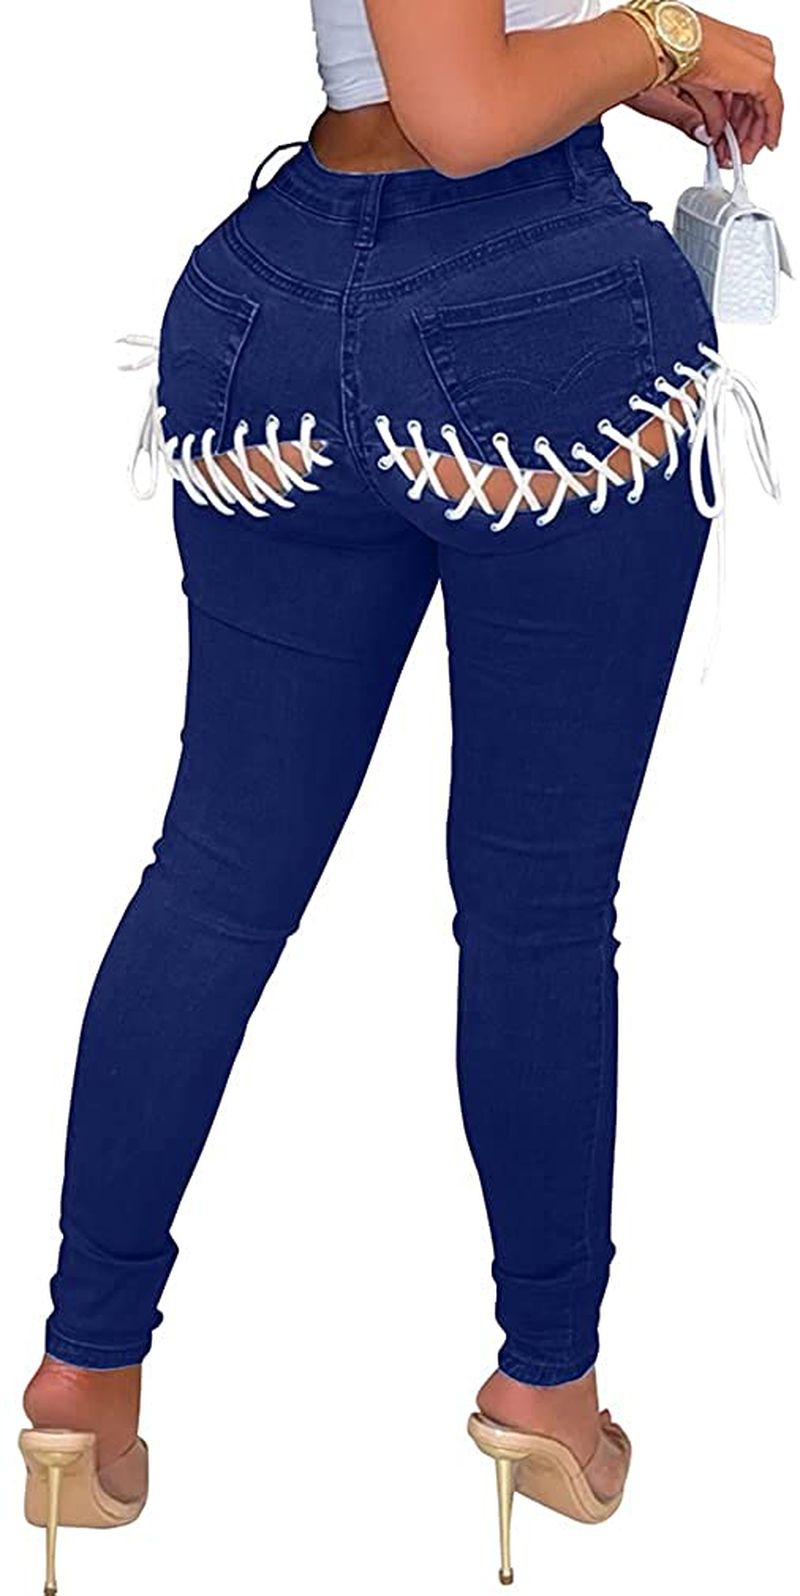 XXTAXN Women's Elastic High Waisted Skinny Ripped Lace Up Adjustable Jeans with Pockets